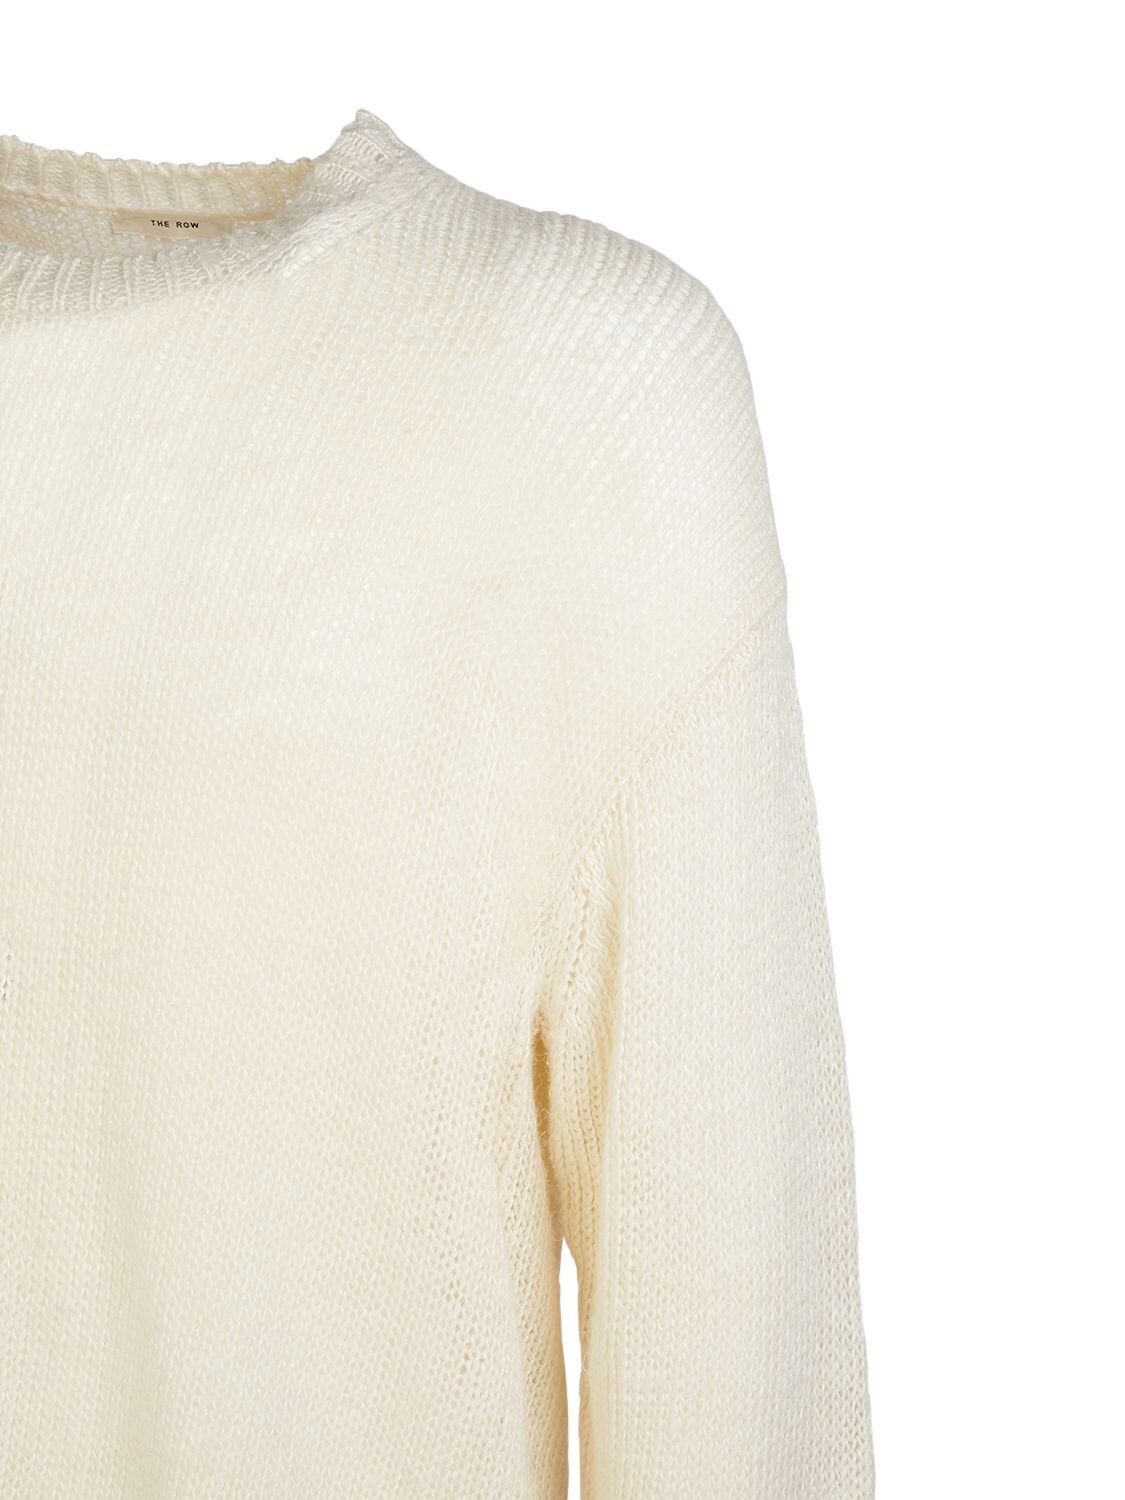 Shop The Row Hank Linen Crewneck Sweater In Off White